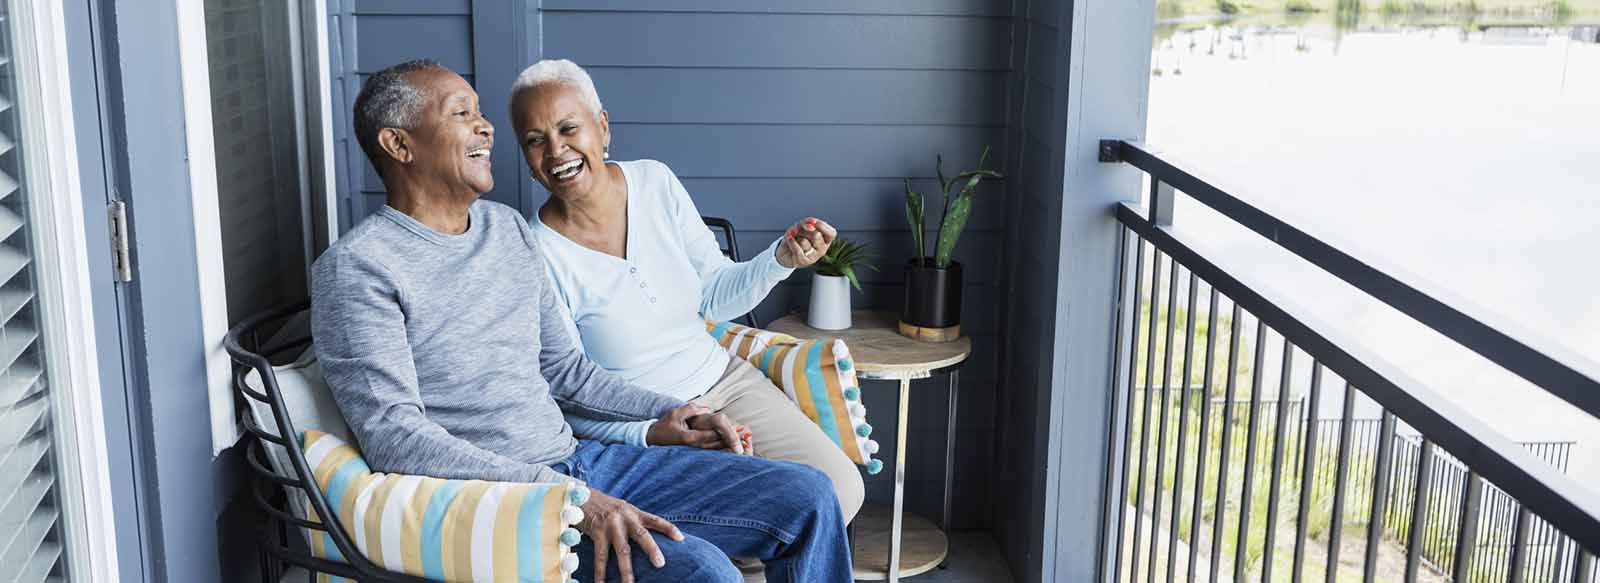 Couple sitting on porch smiling